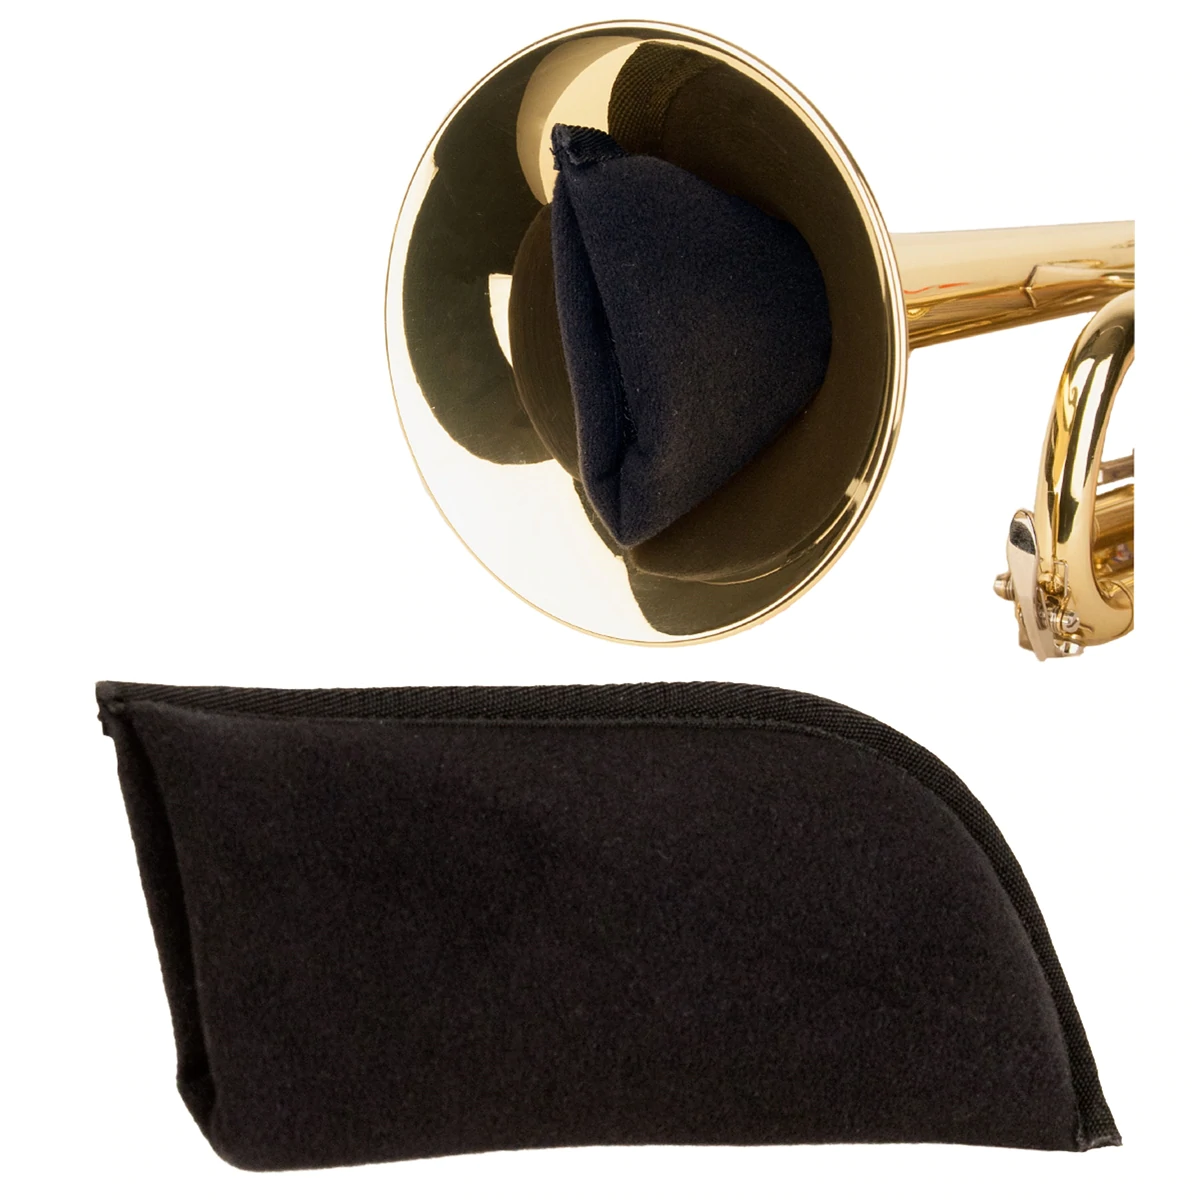 PROTEC Brass In-Bell Mouthpiece Pouch